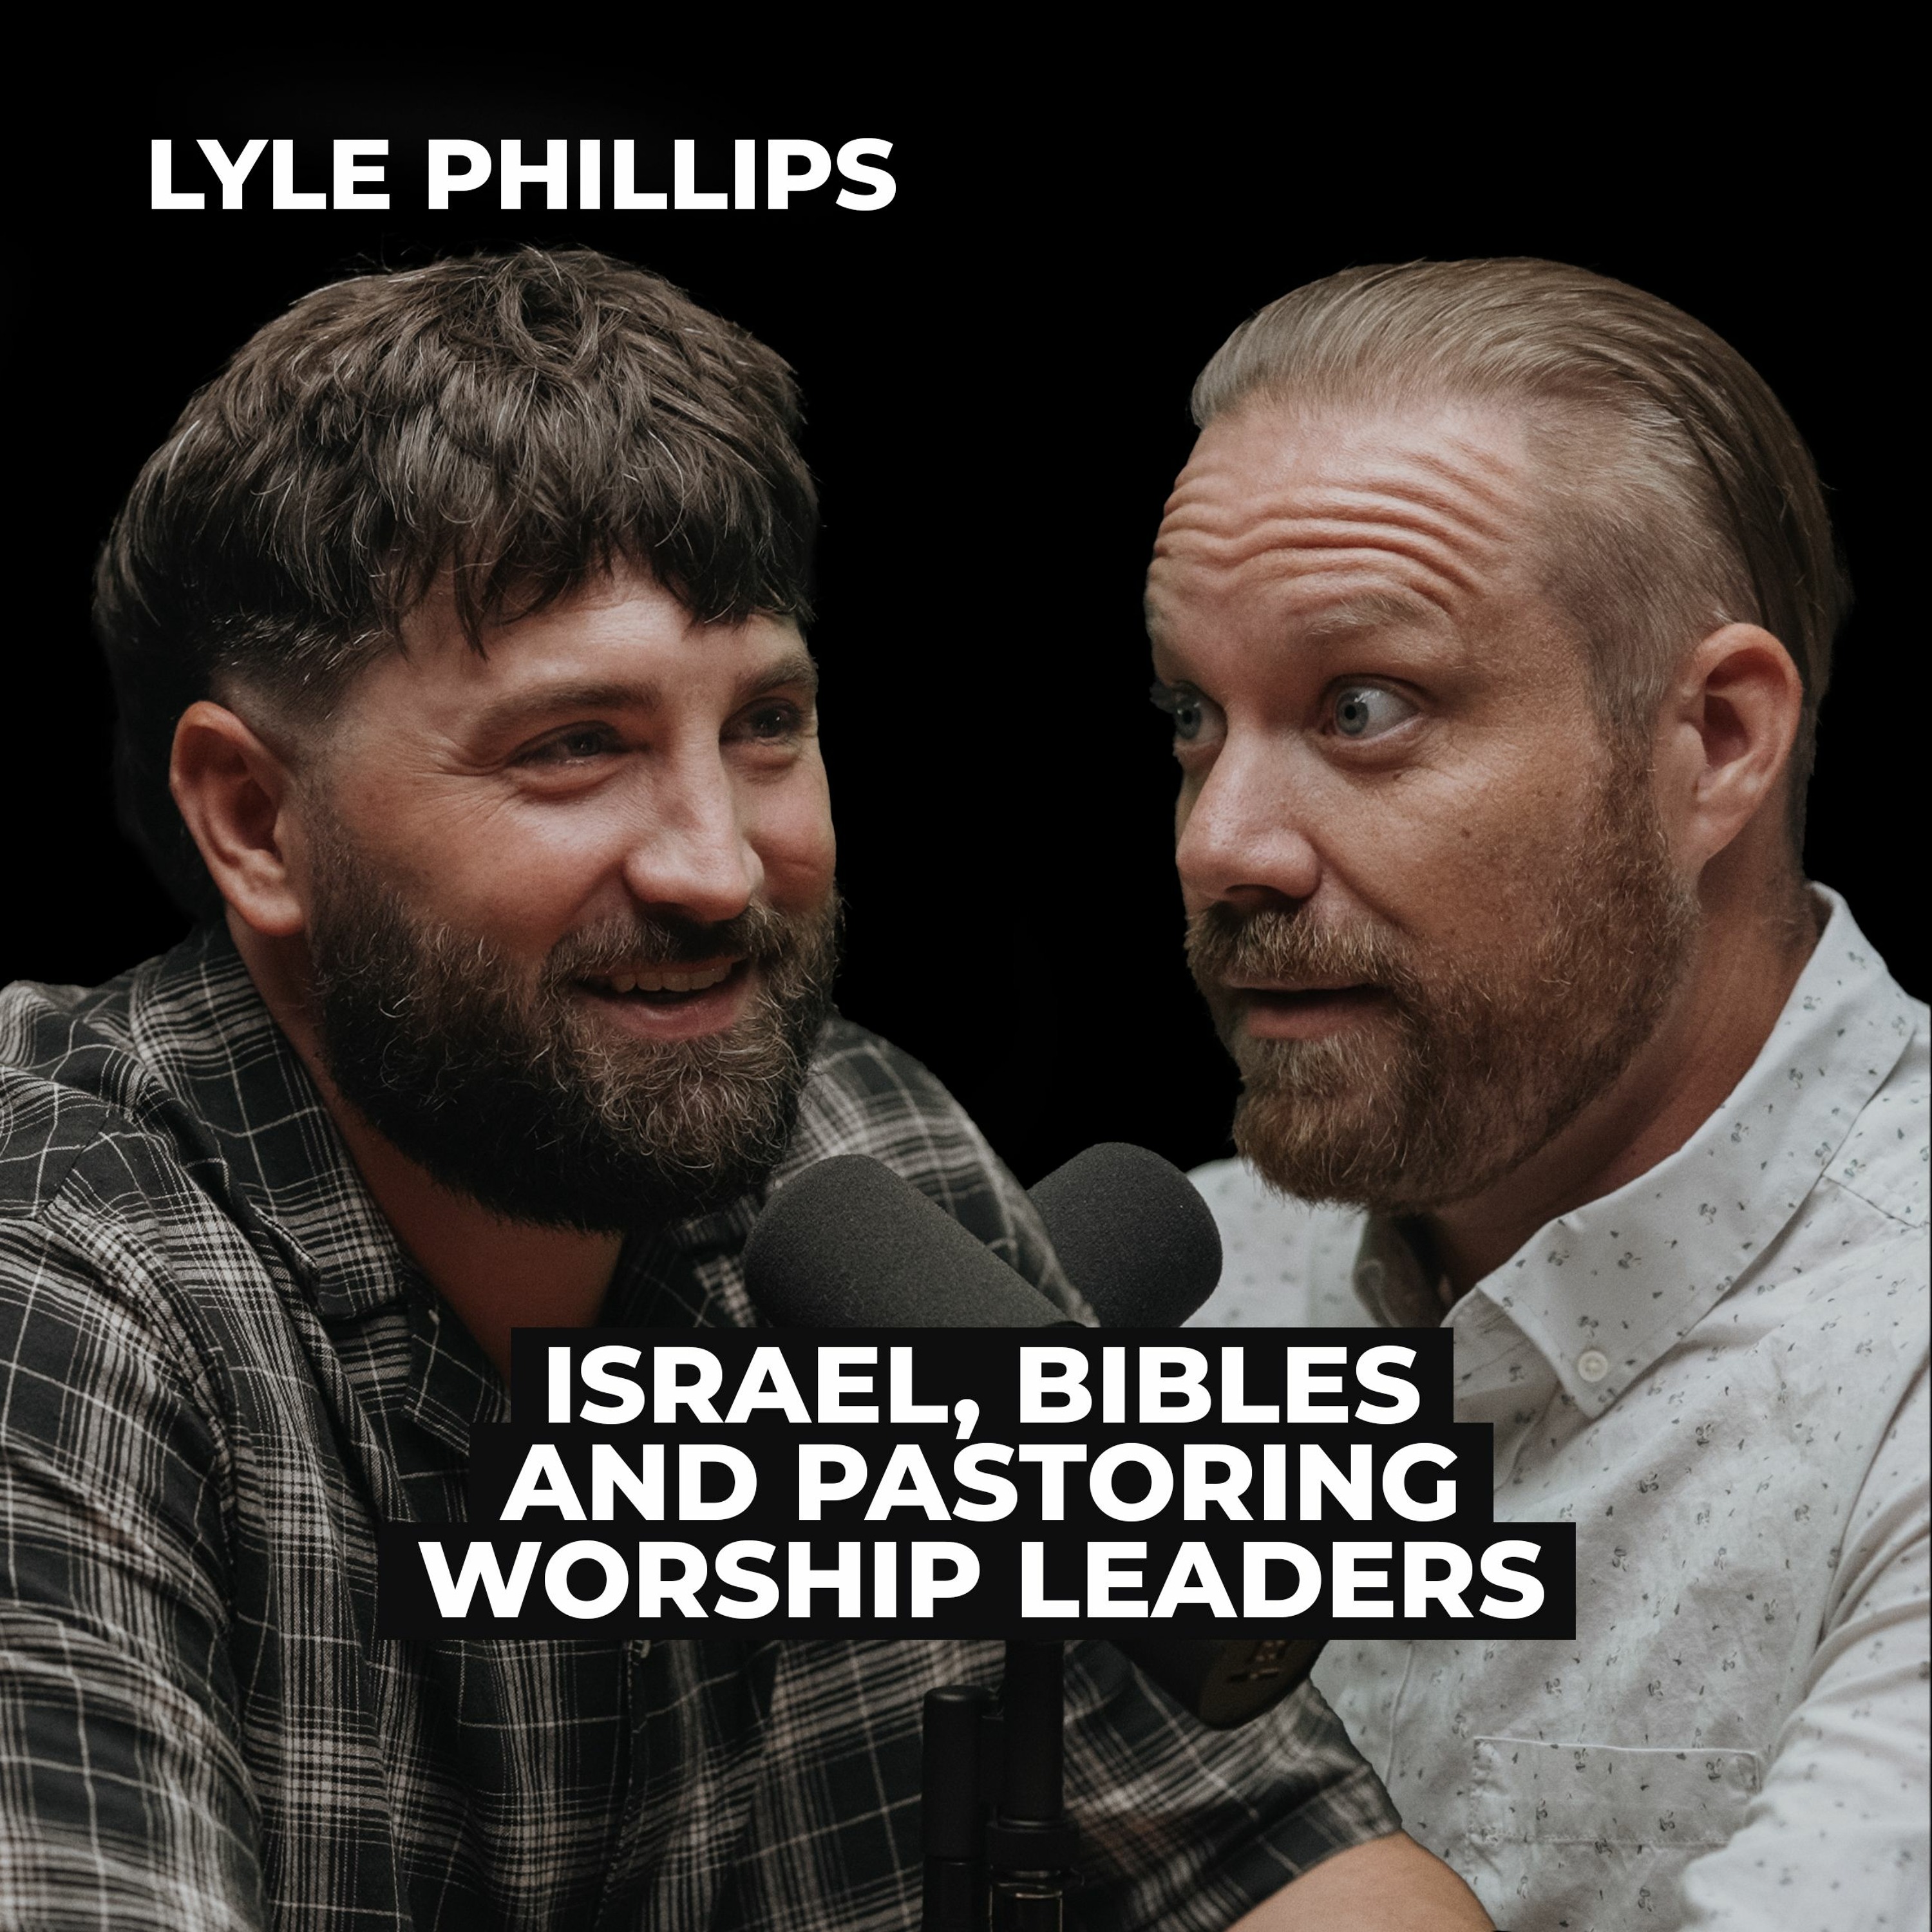 Lyle Phillips: Israel, Pastoring Worship Leaders, and Bibles